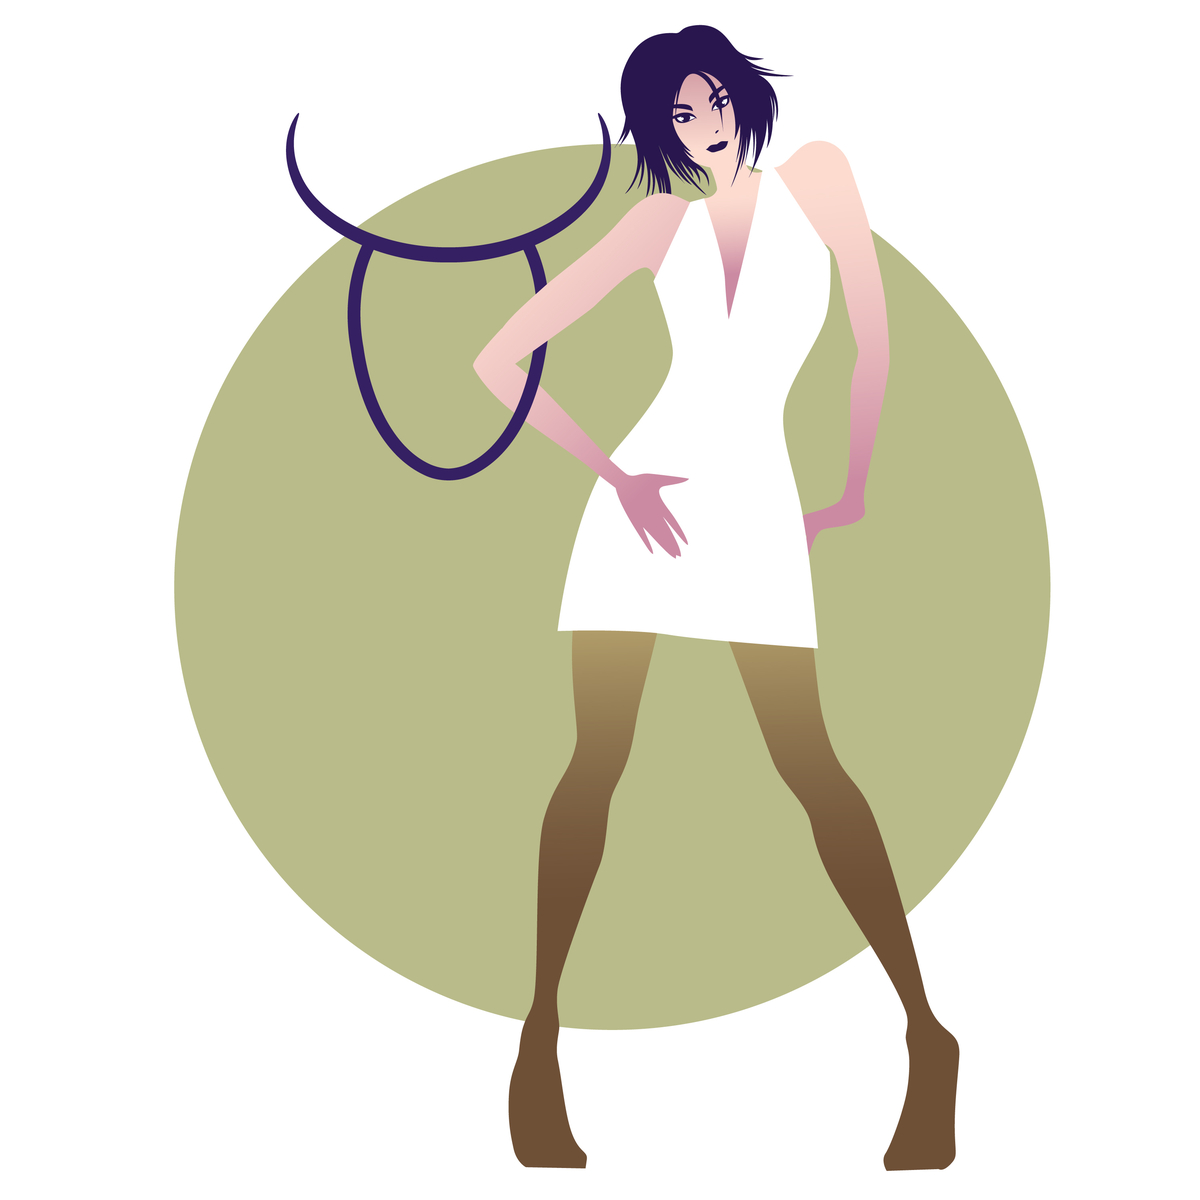 Woman with white dress and green stockings standing with her hand on her hip with the Taurus Zodiac Sign next to her.